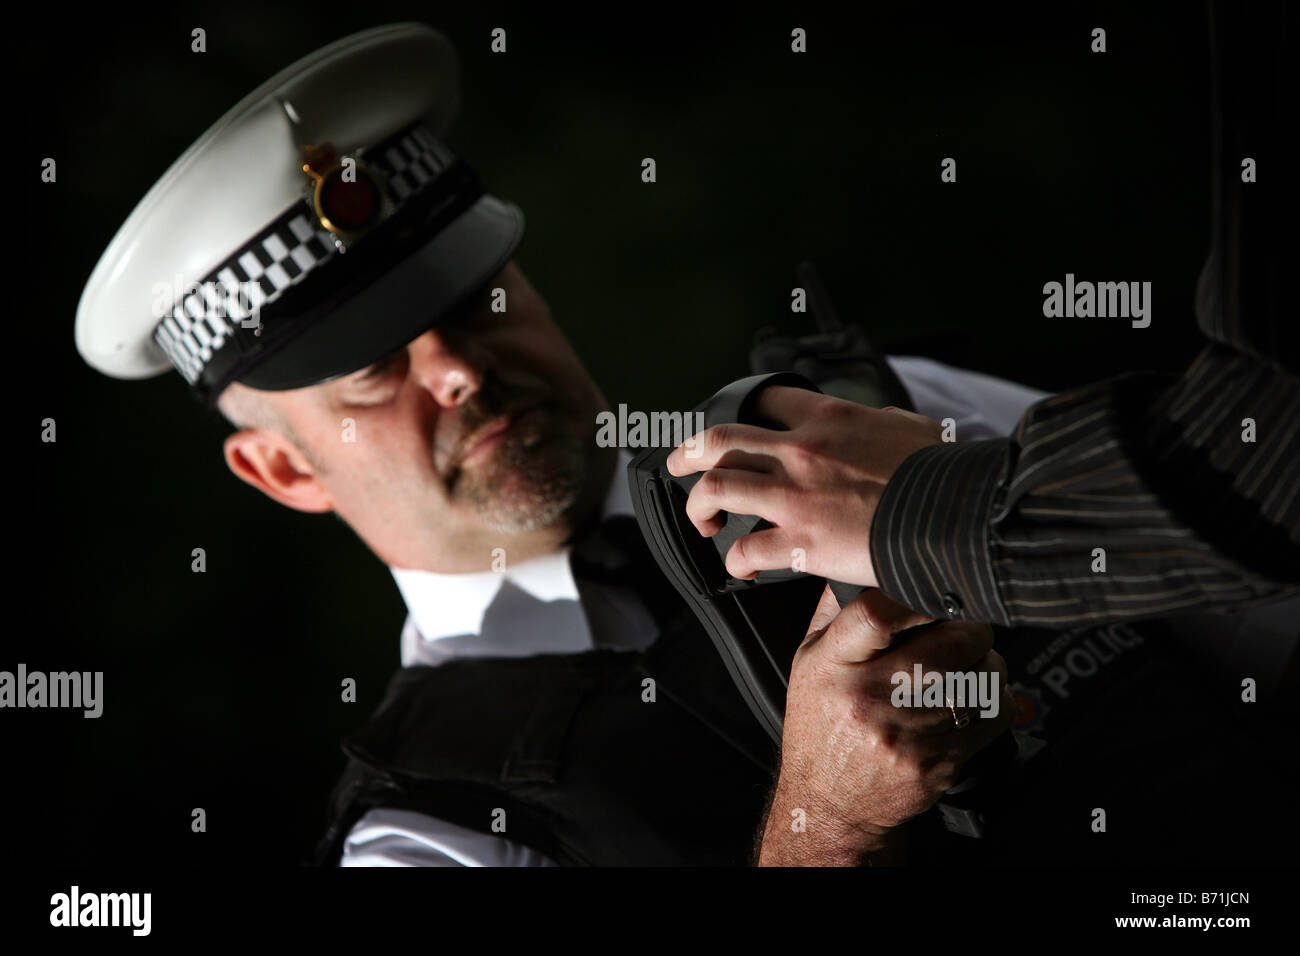 a police officer uses a portable finger printing device Stock Photo